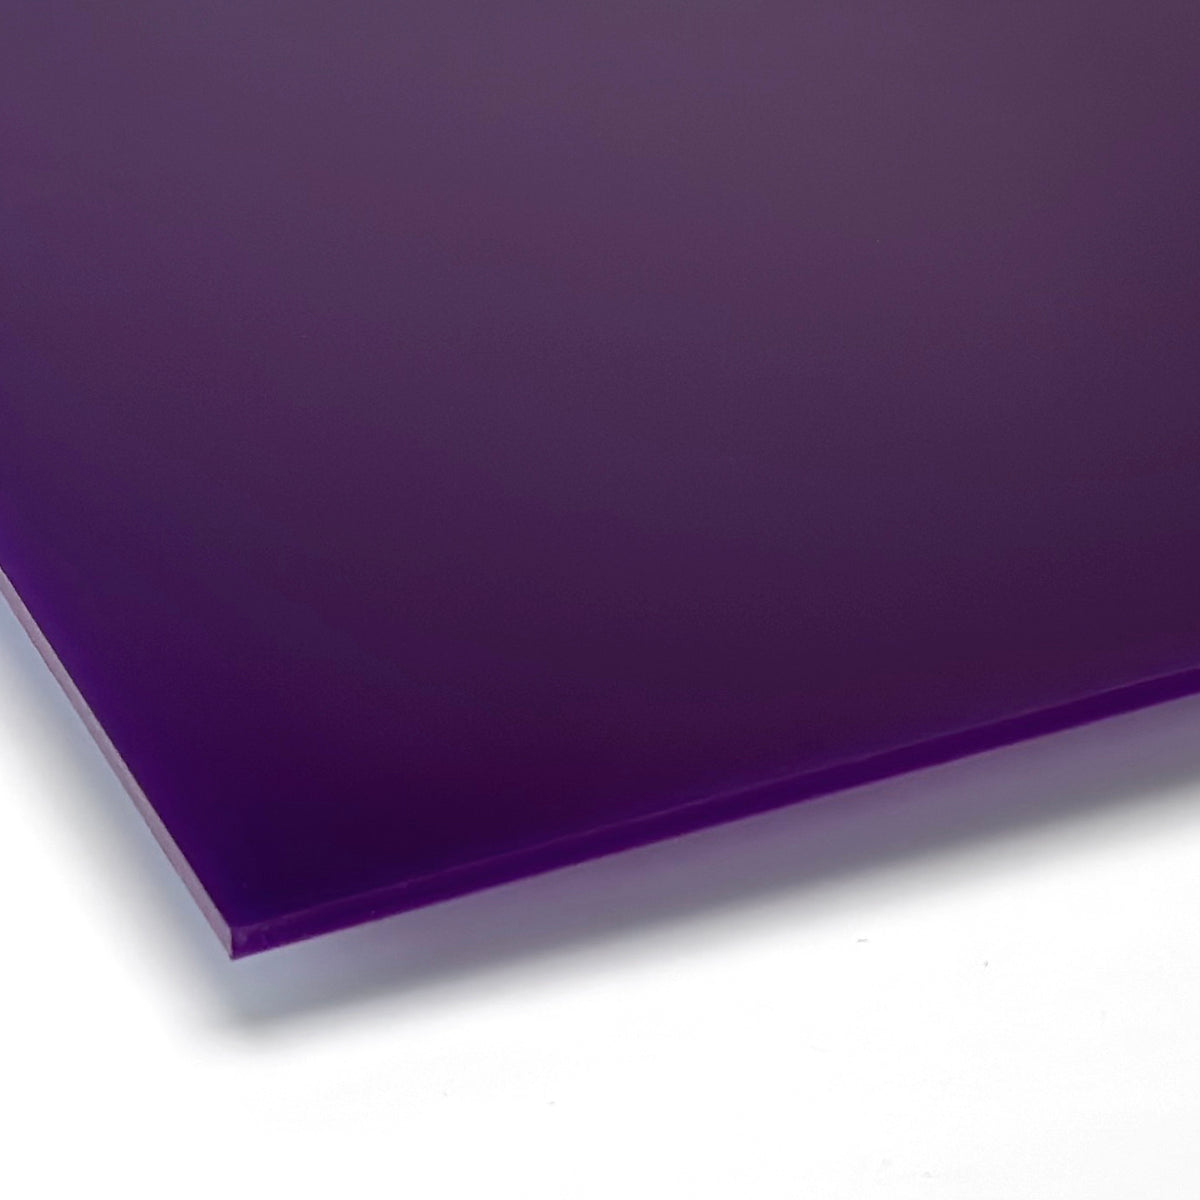 Purple Acrylic with laser cutting & Printing - 300x200mm